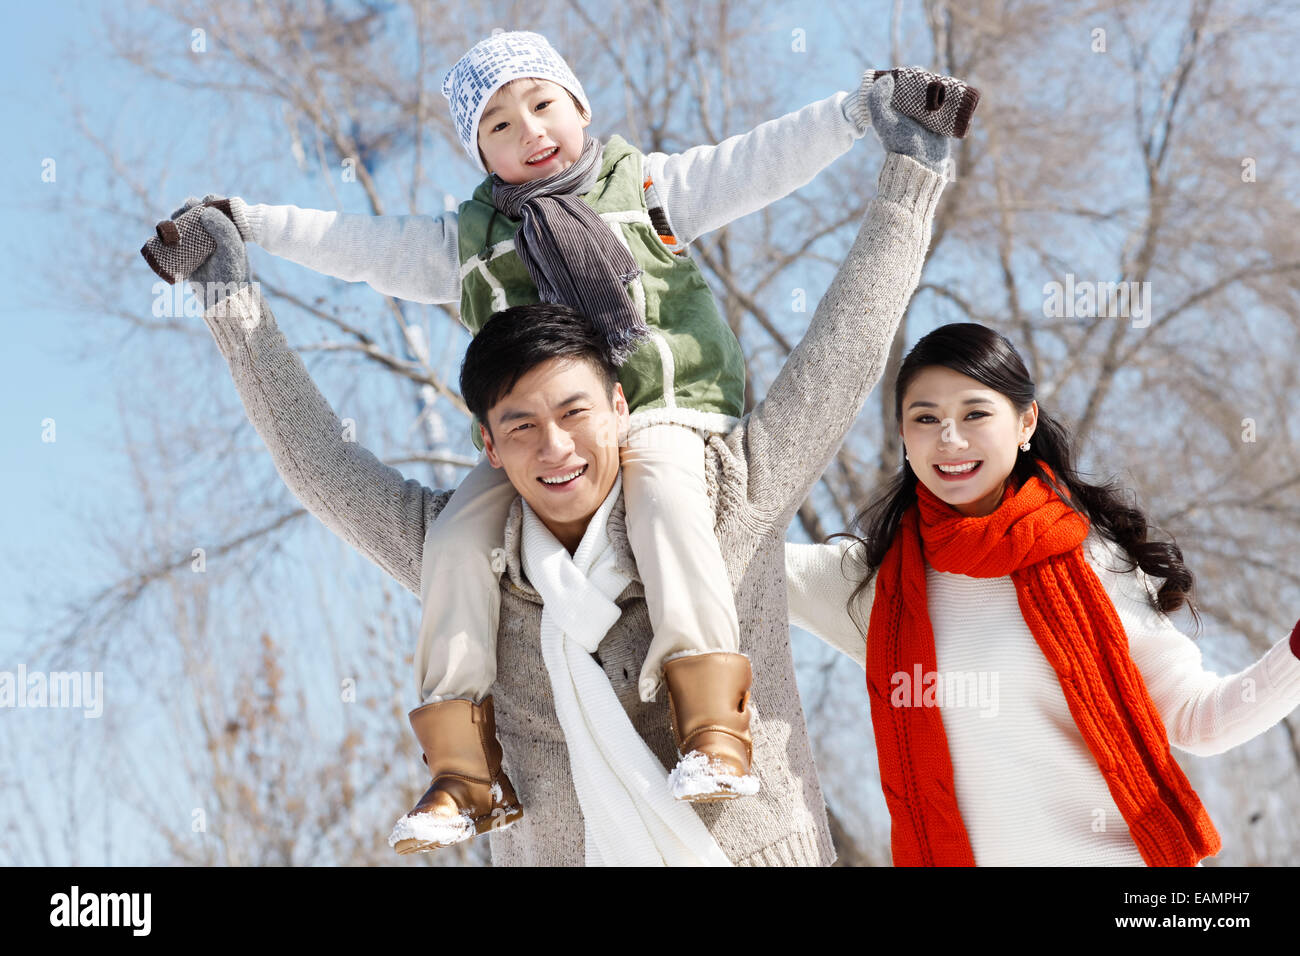 One-child families play outdoors Stock Photo